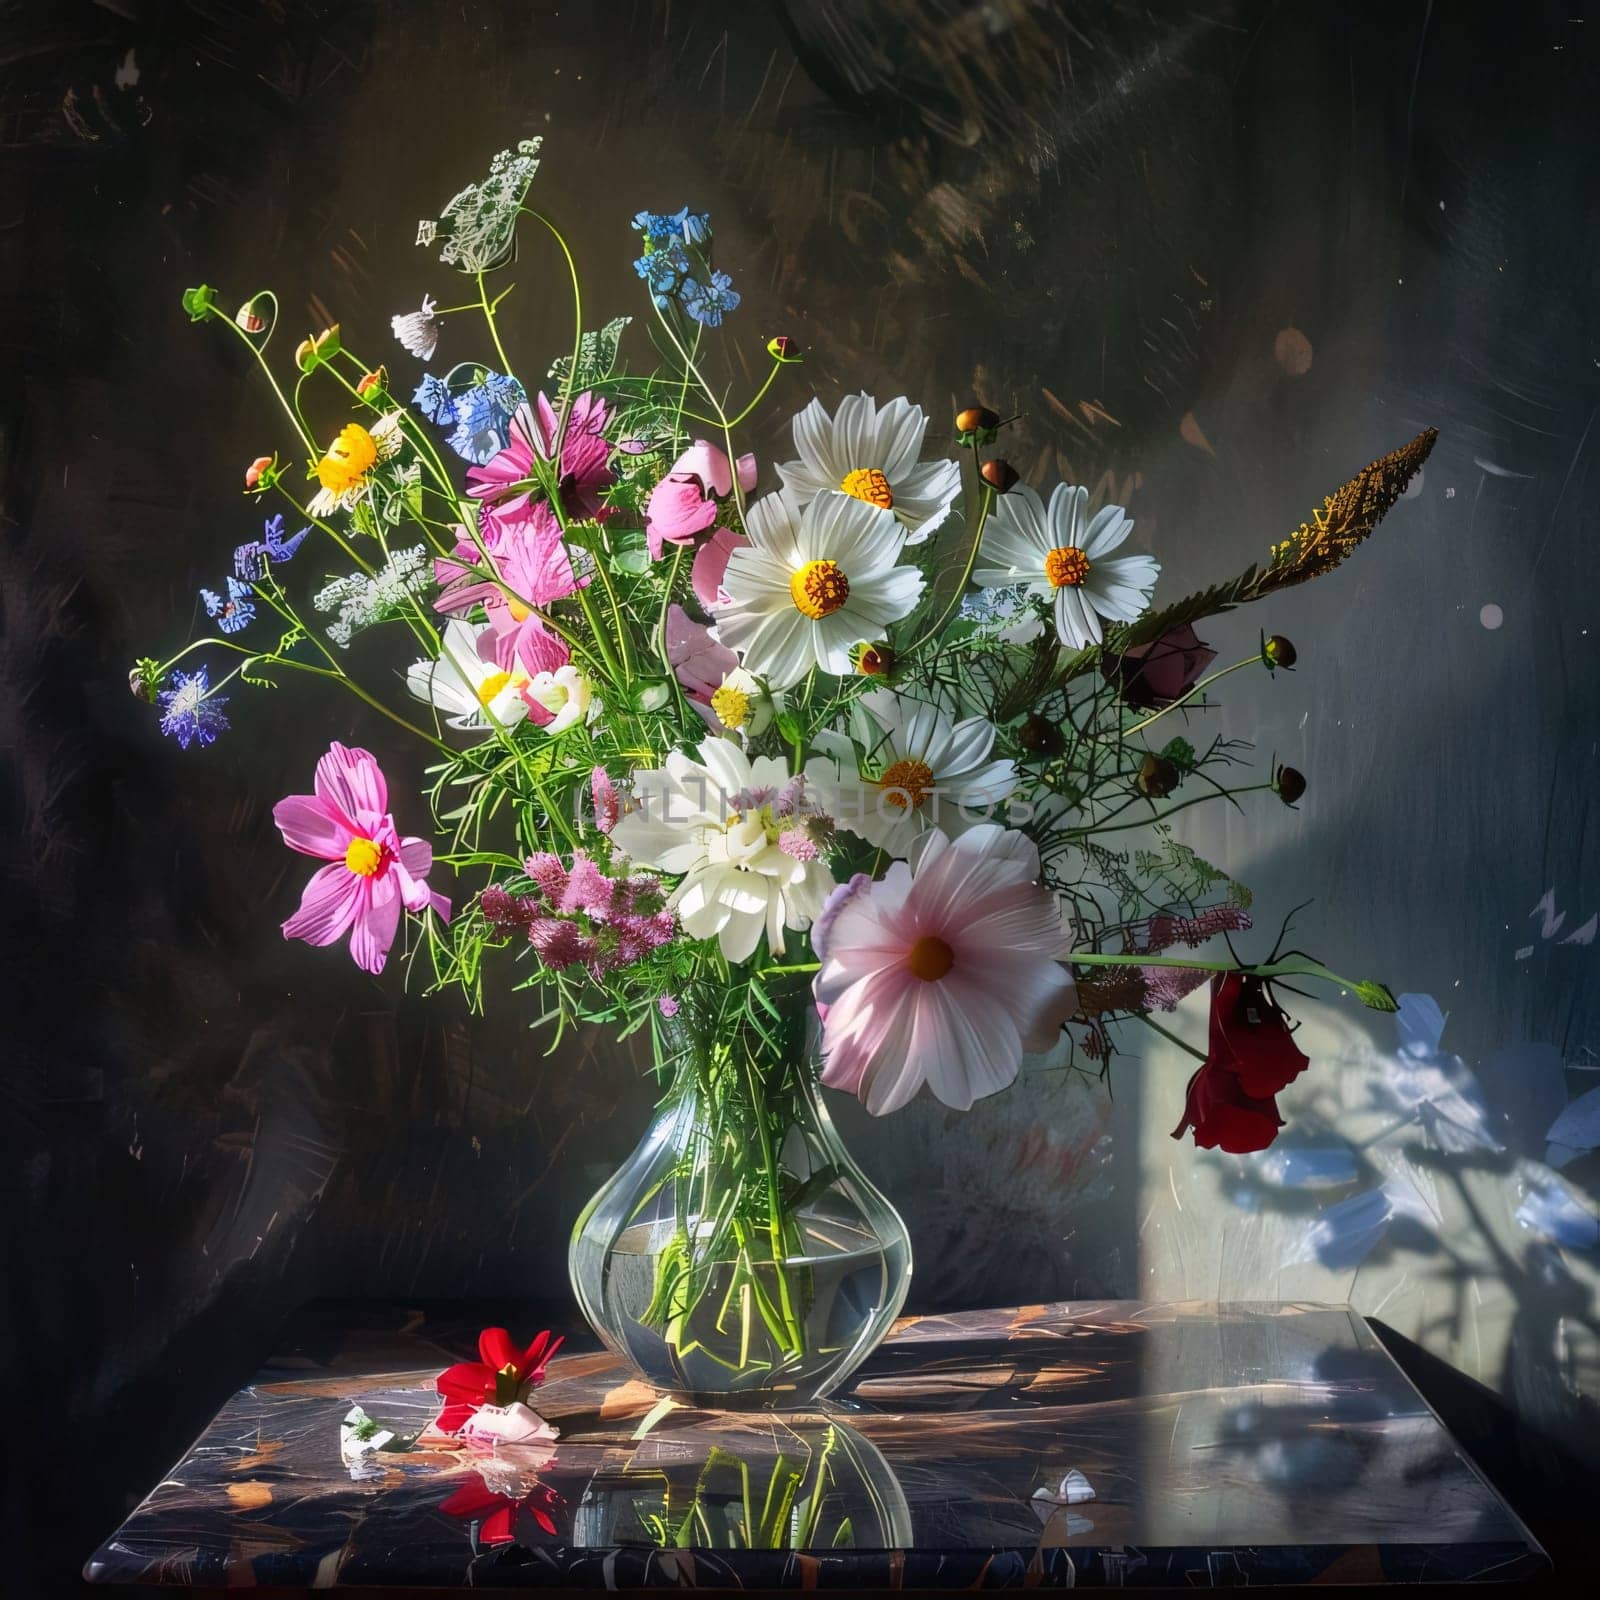 Transparent vase on black background with field colored flowers. Pink white green leaves. Flowering flowers, a symbol of spring, new life. A joyful time of nature waking up to life.